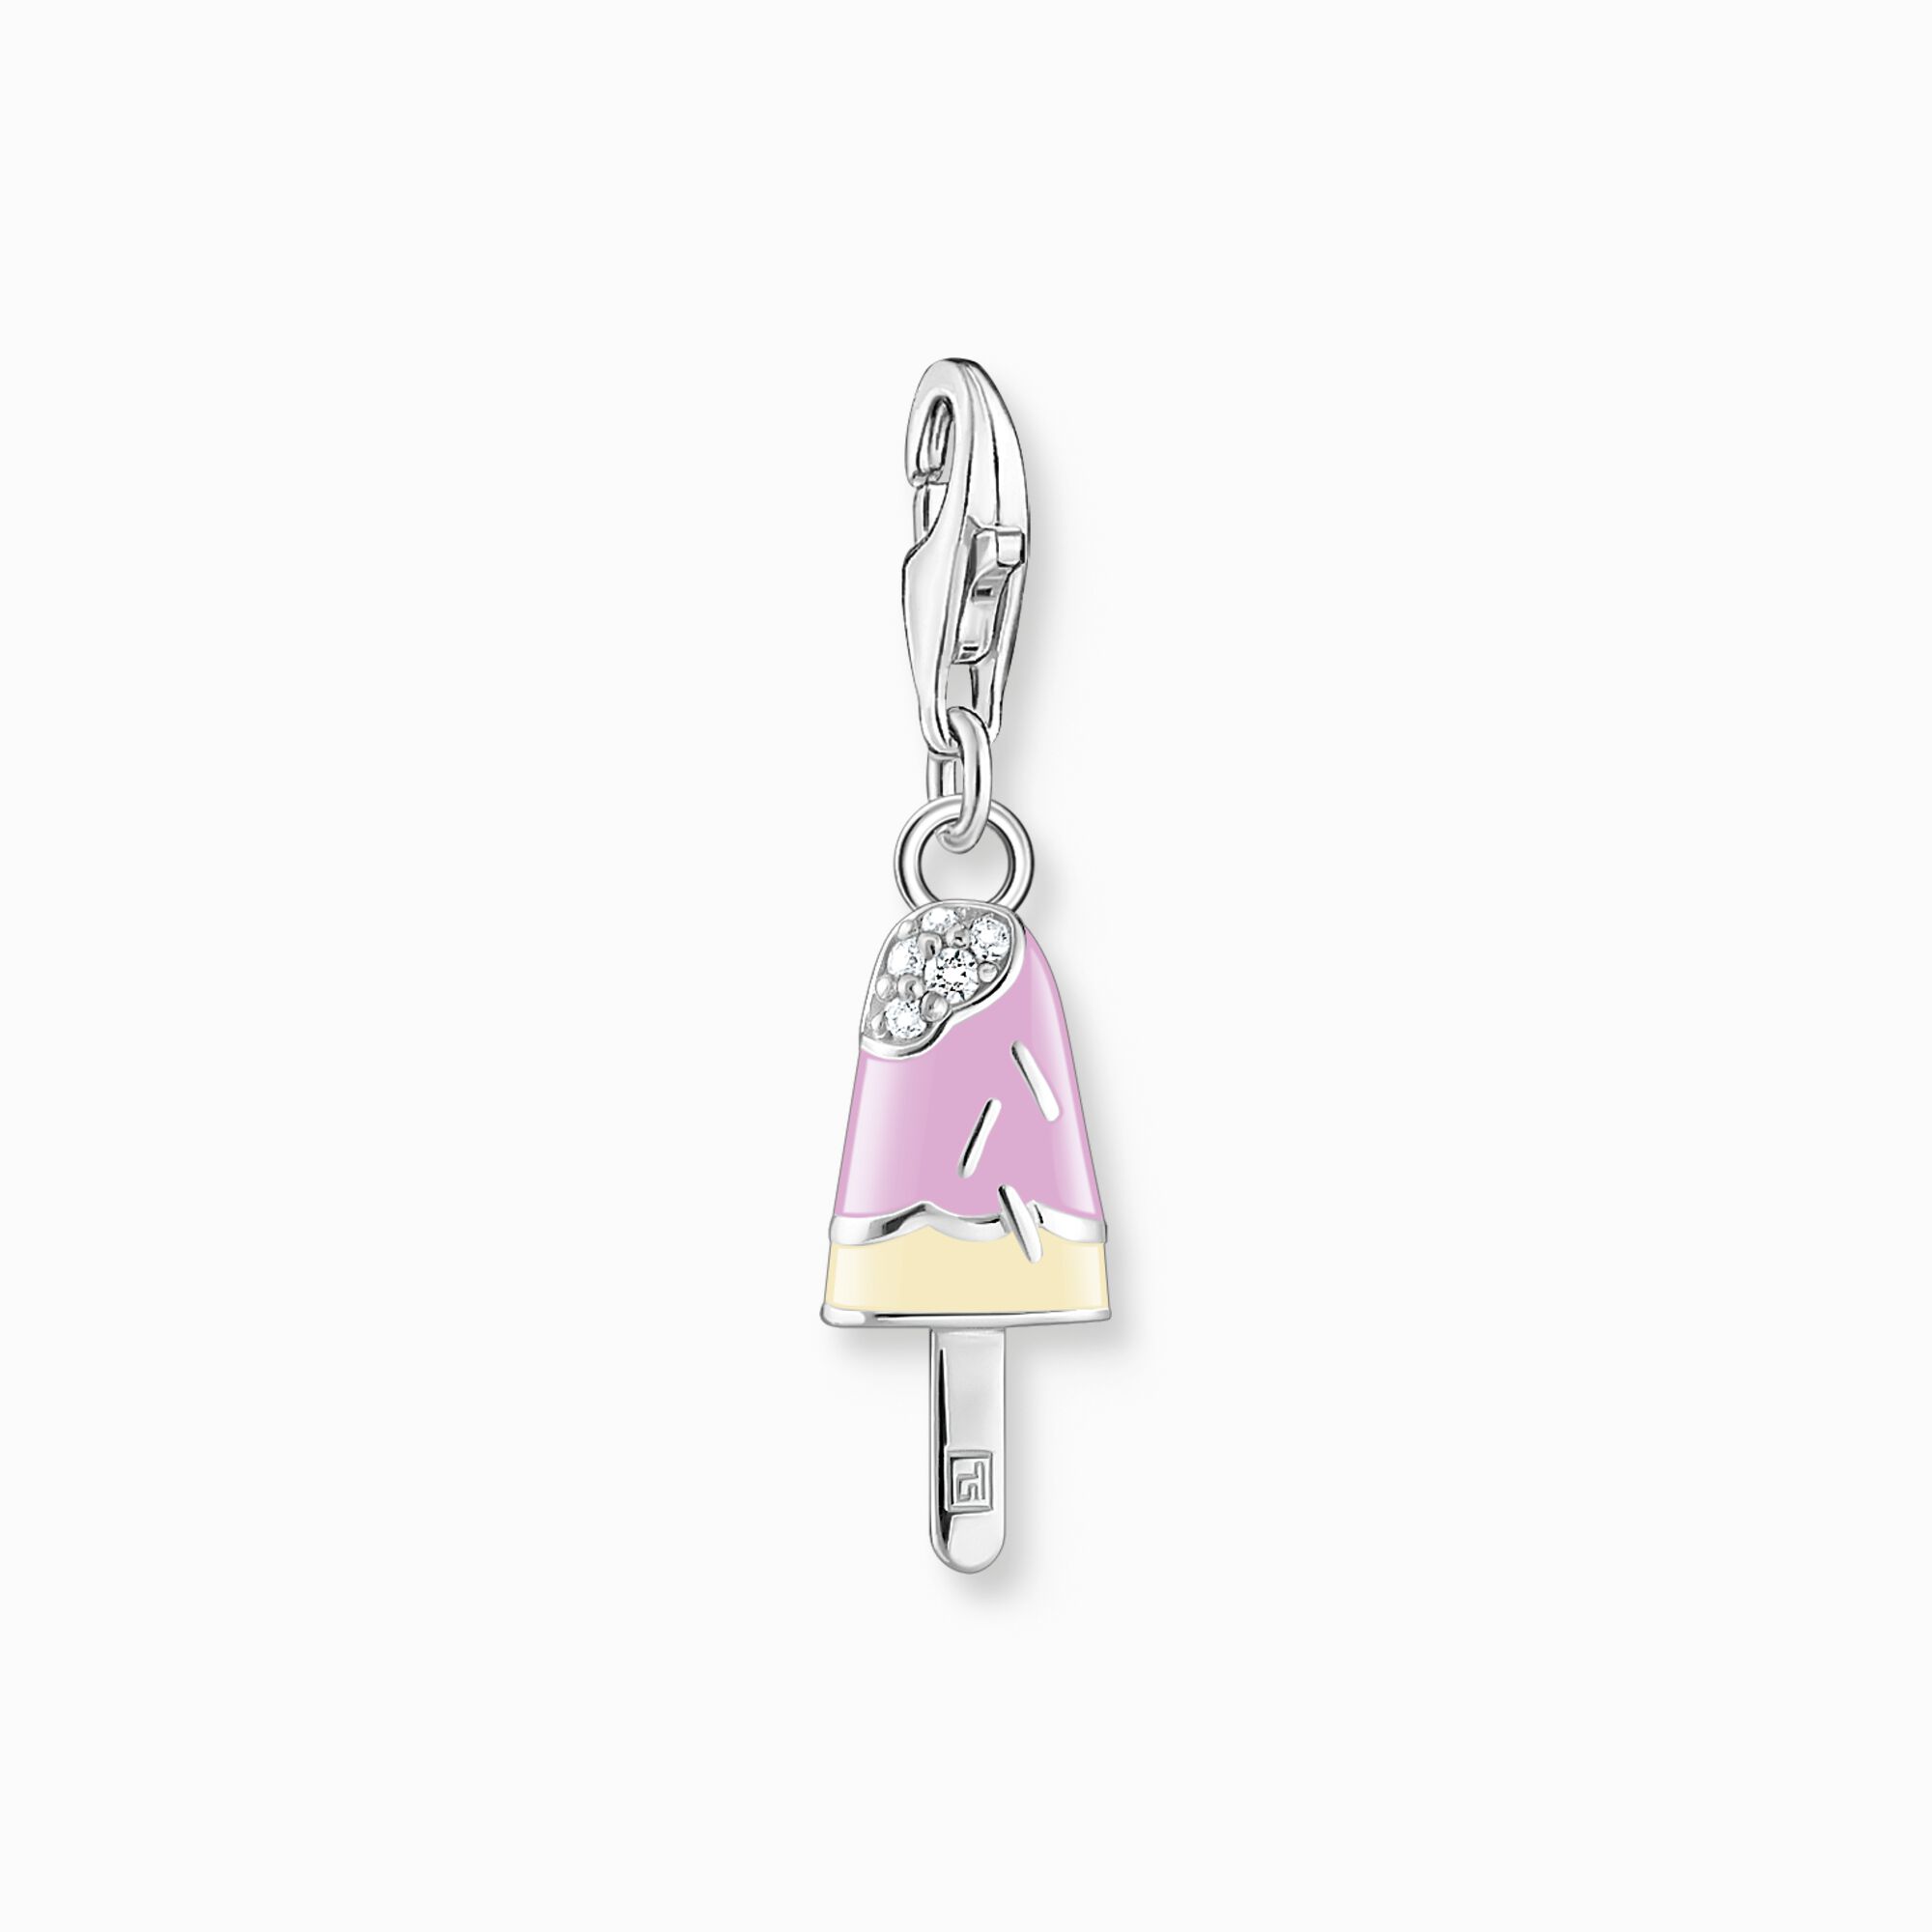 Charm pendant colorful popsicle with white stones silver from the Charm Club collection in the THOMAS SABO online store